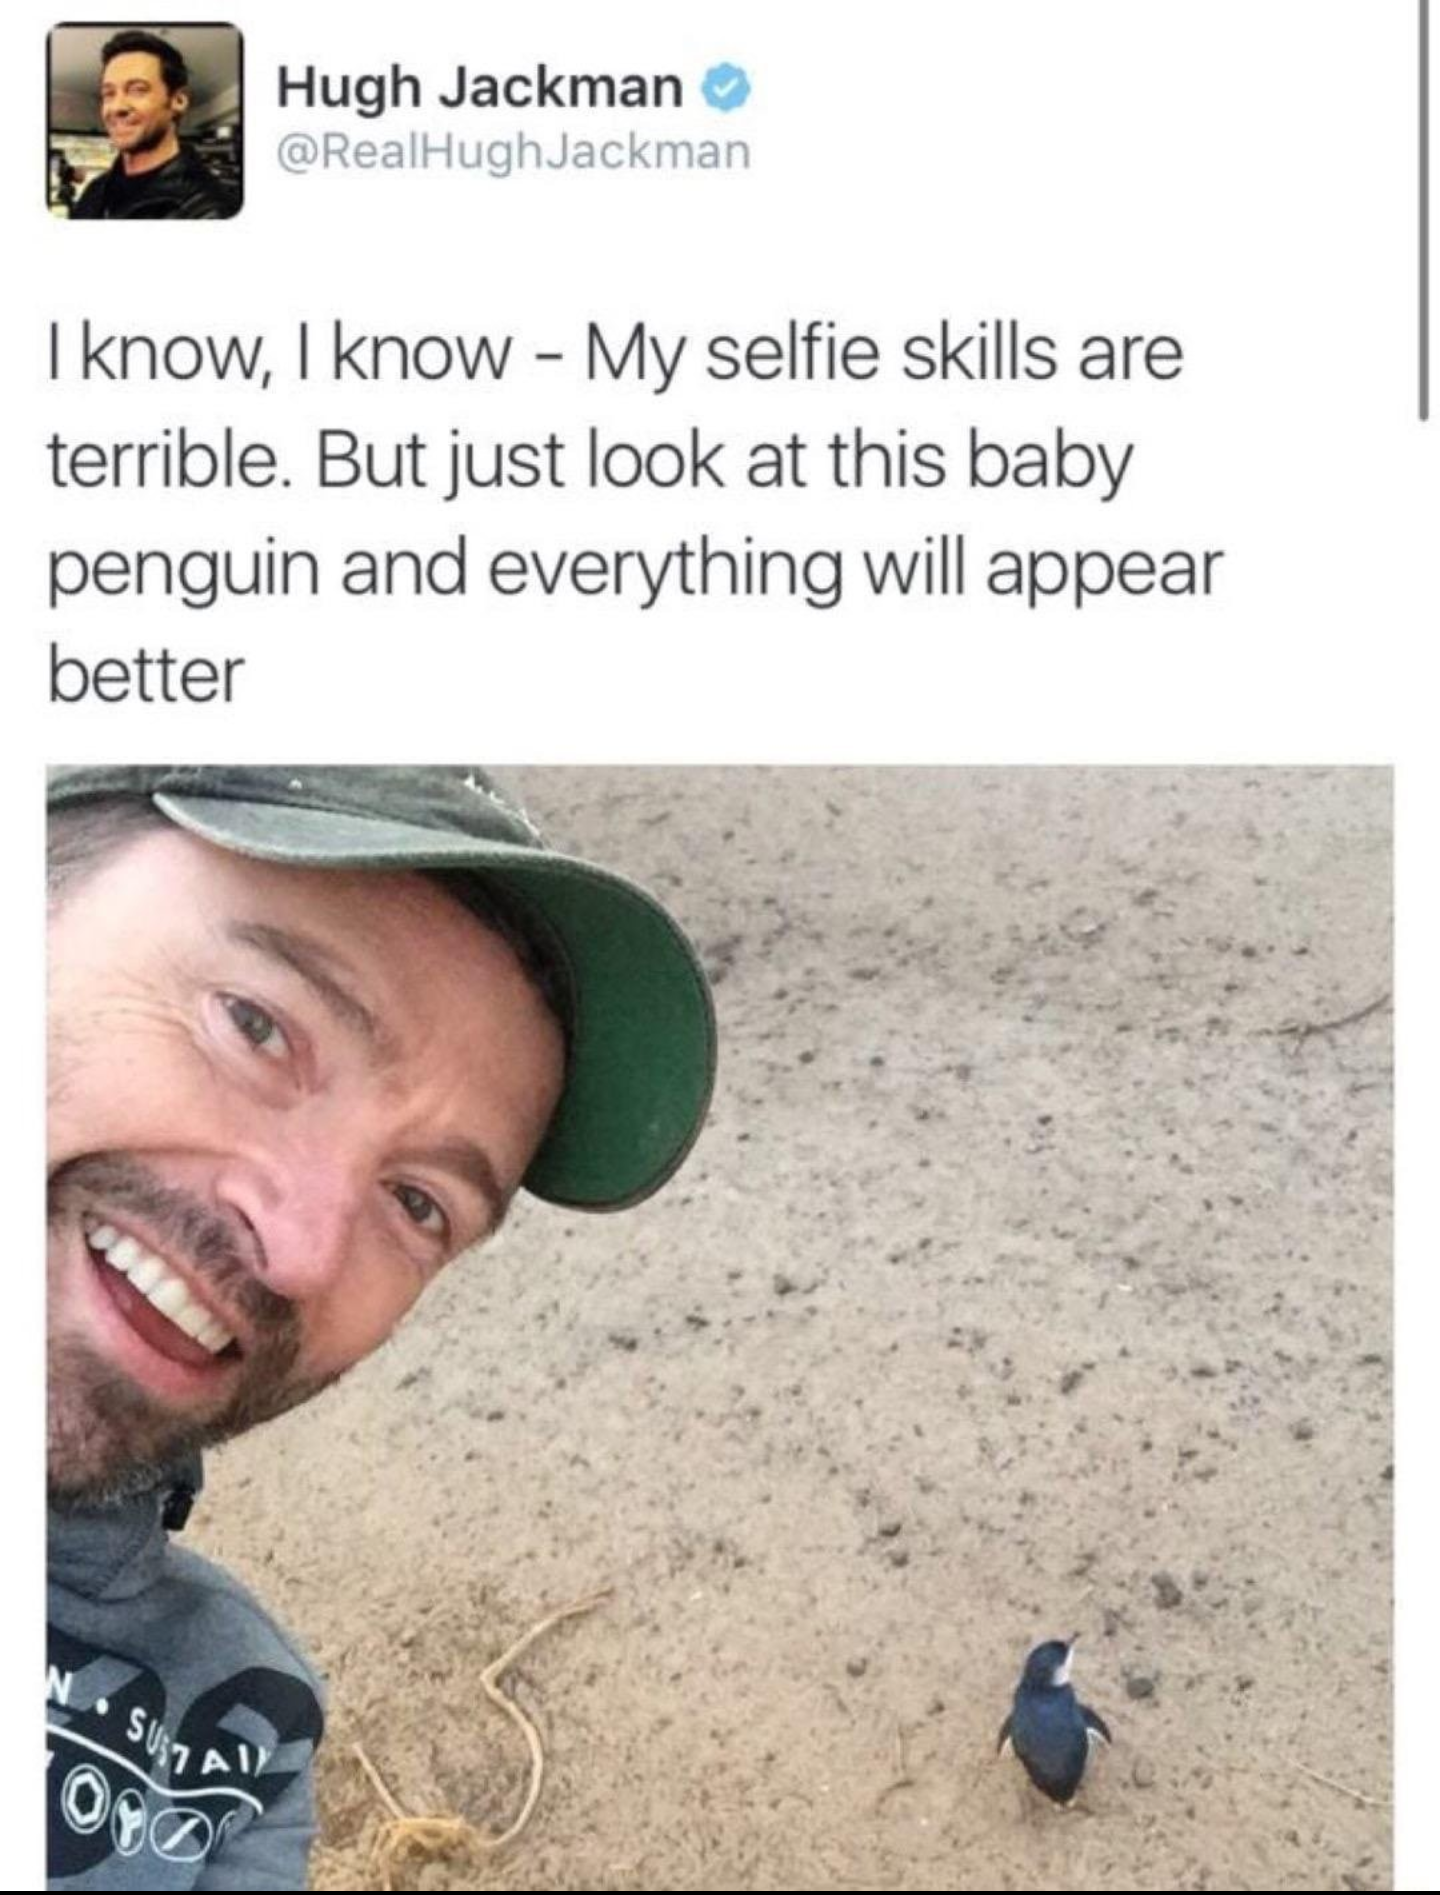 hugh jackman penguin - Hugh Jackman Jackman I know, I know My selfie skills are terrible. But just look at this baby penguin and everything will appear better